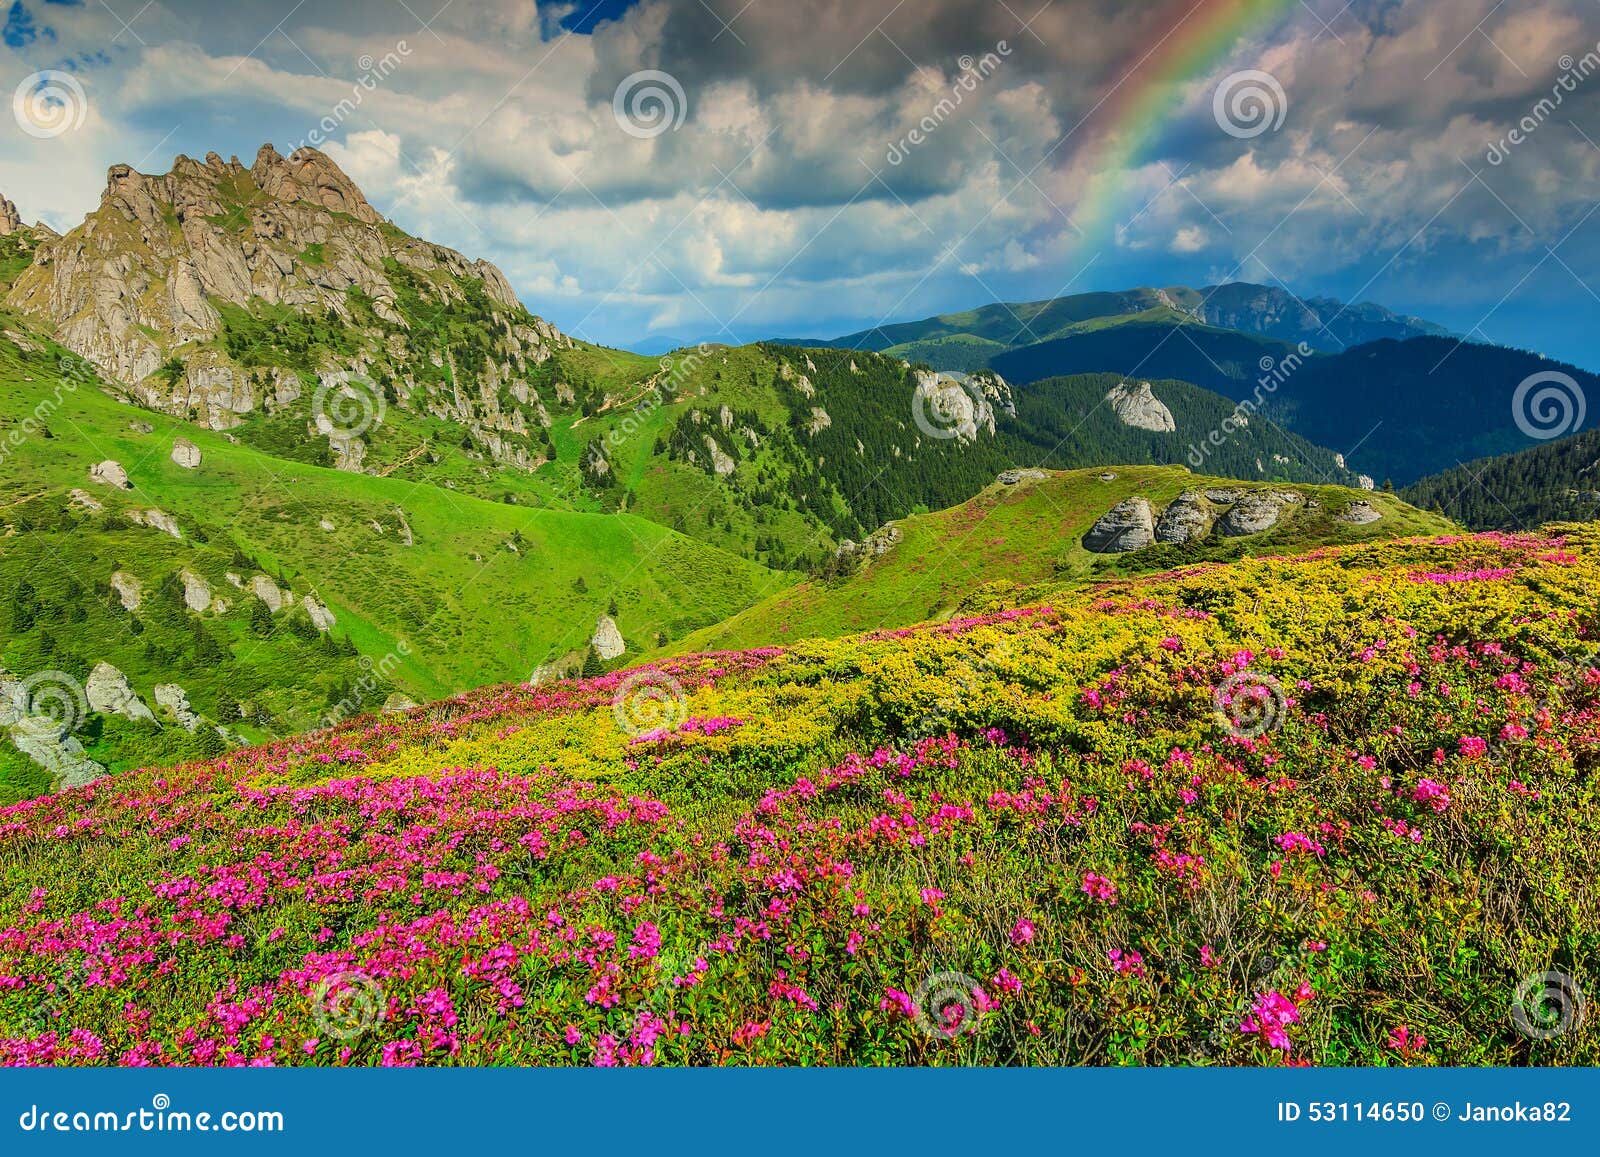 stunning pink rhododendron flowers in the mountains,ciucas,carpathians,romania